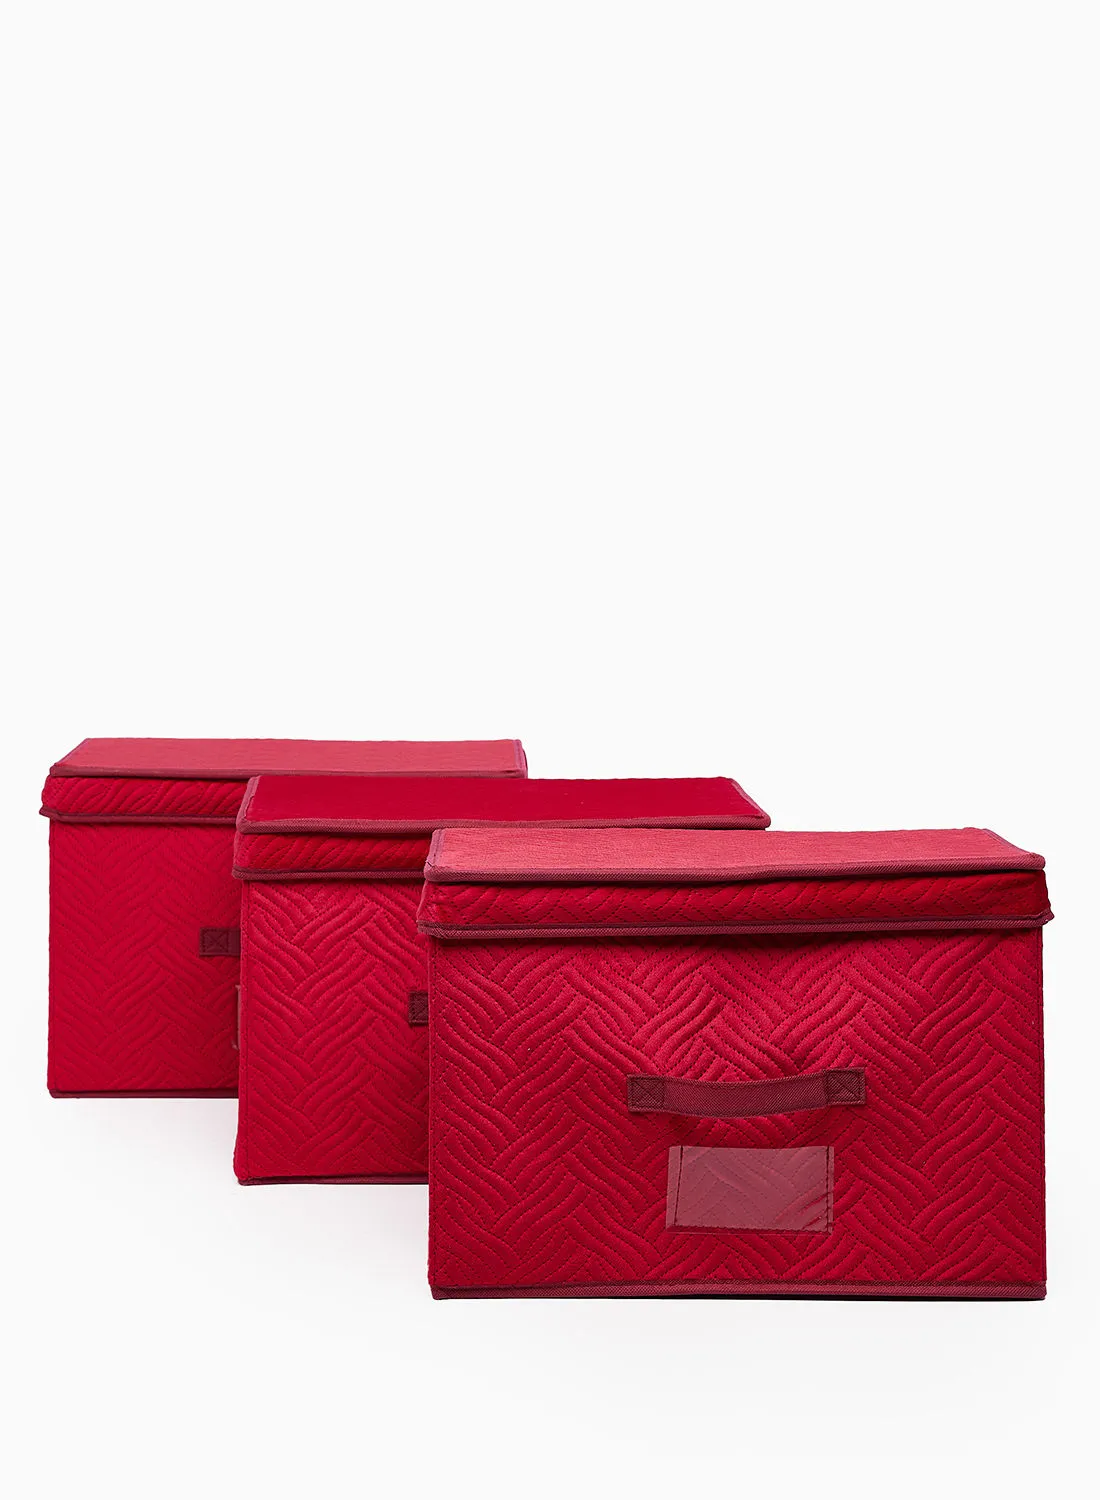 Amal 3 Pack Storage Organiser With Side Handles And Top Zipper Lid, Easy To Collapse From The Top, Handy For Closet And Dresser Organisation Rose Red 39X27X26cm